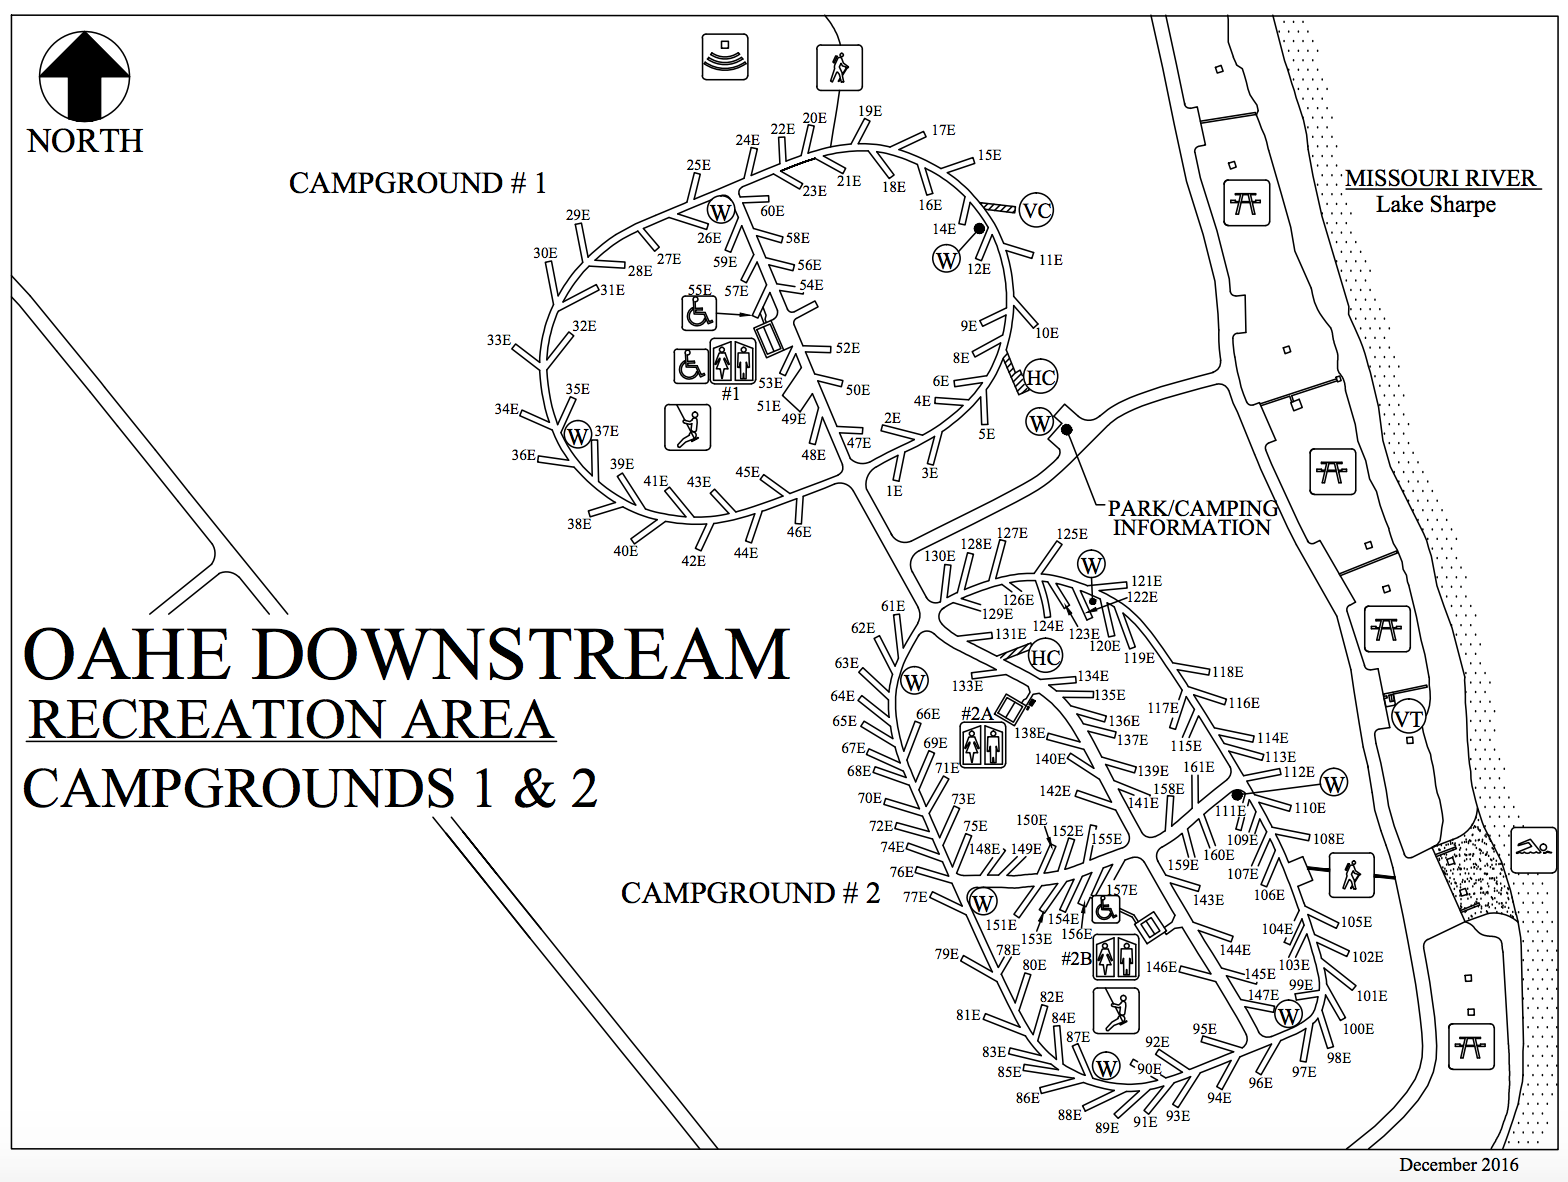 Oahe Downstream Recreation Area Map, Campgrounds 1 & 2